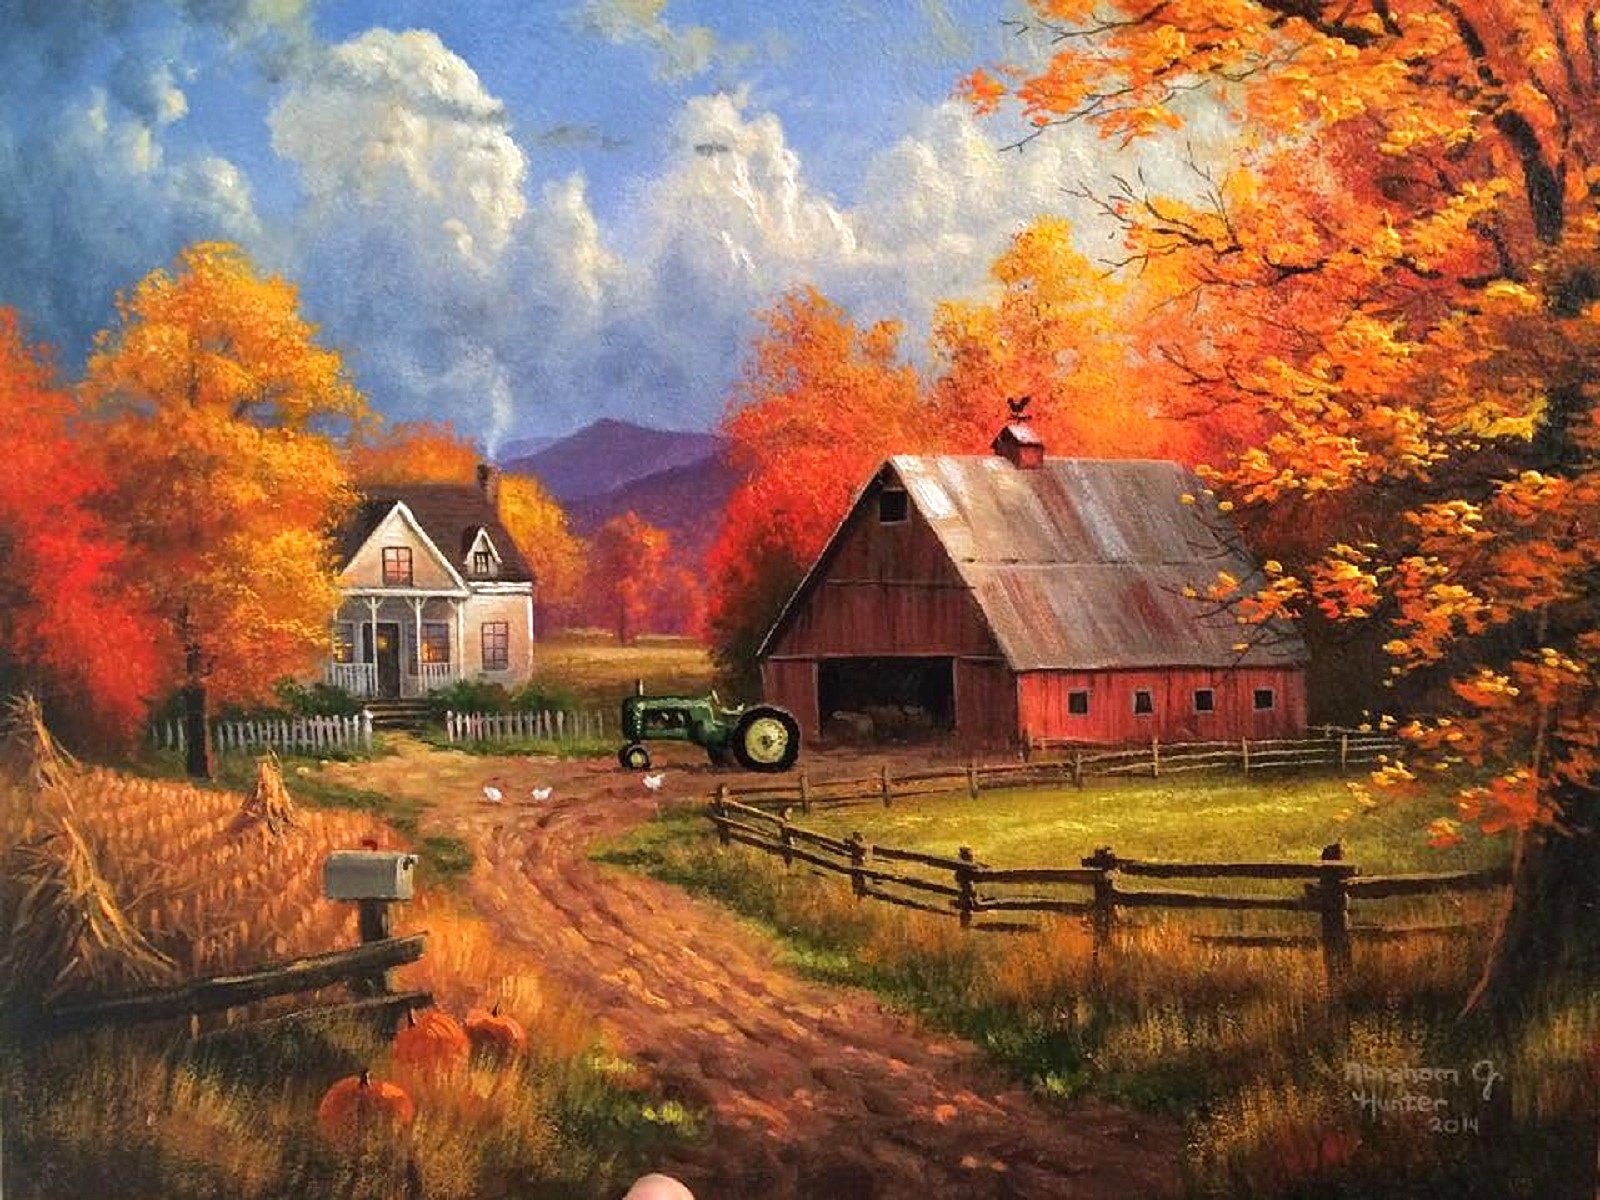 autumn, Fall, Landscape, Nature, Tree, Forest, Leaf, Leaves, Farm, House, Tractor, Rustic, Artwork Wallpaper HD / Desktop and Mobile Background